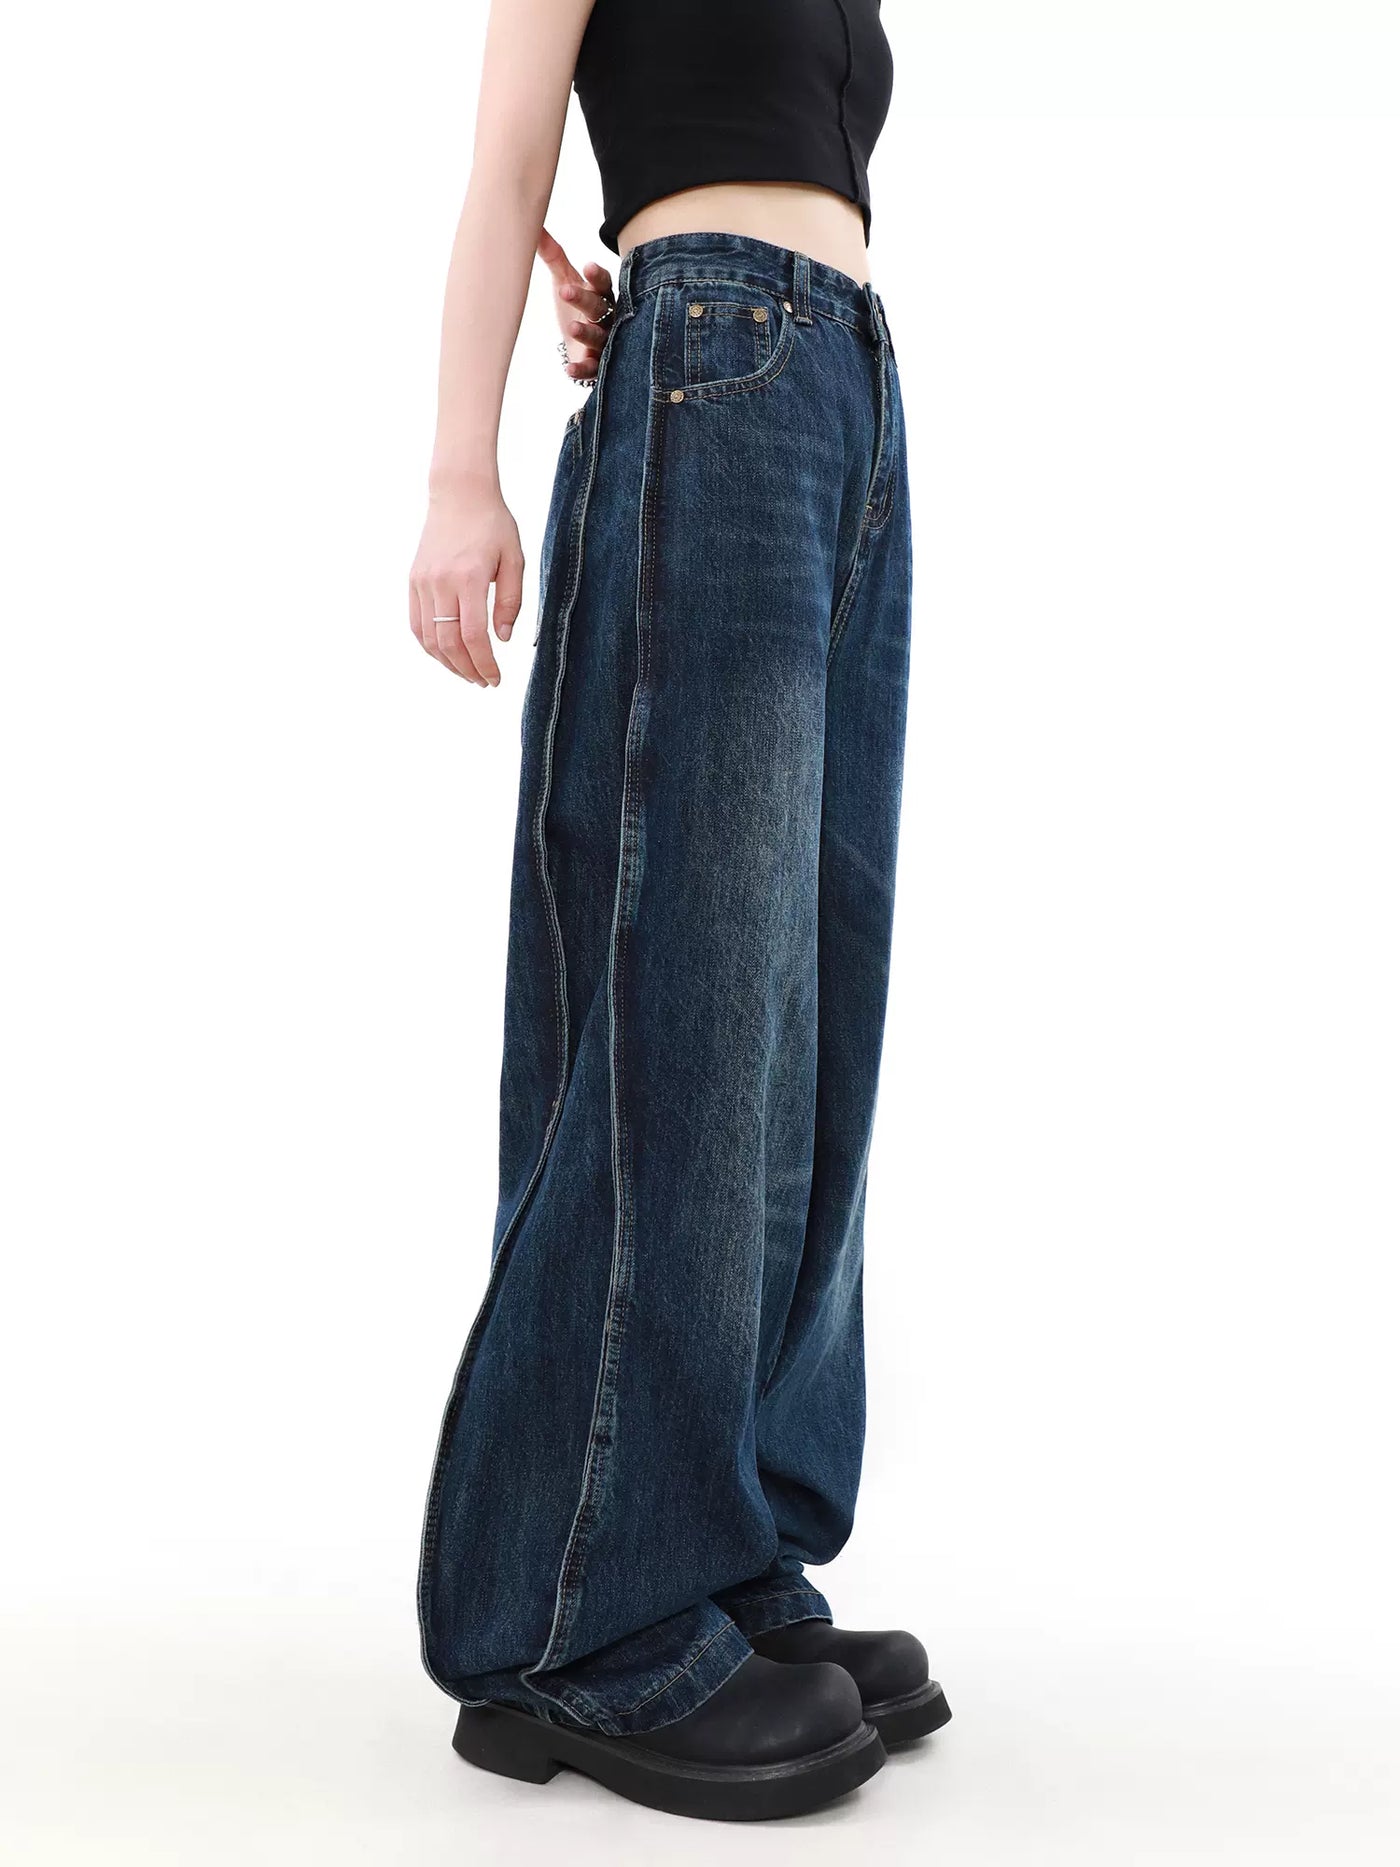 Subtle Fade Versatile Jeans Korean Street Fashion Jeans By Mr Nearly Shop Online at OH Vault